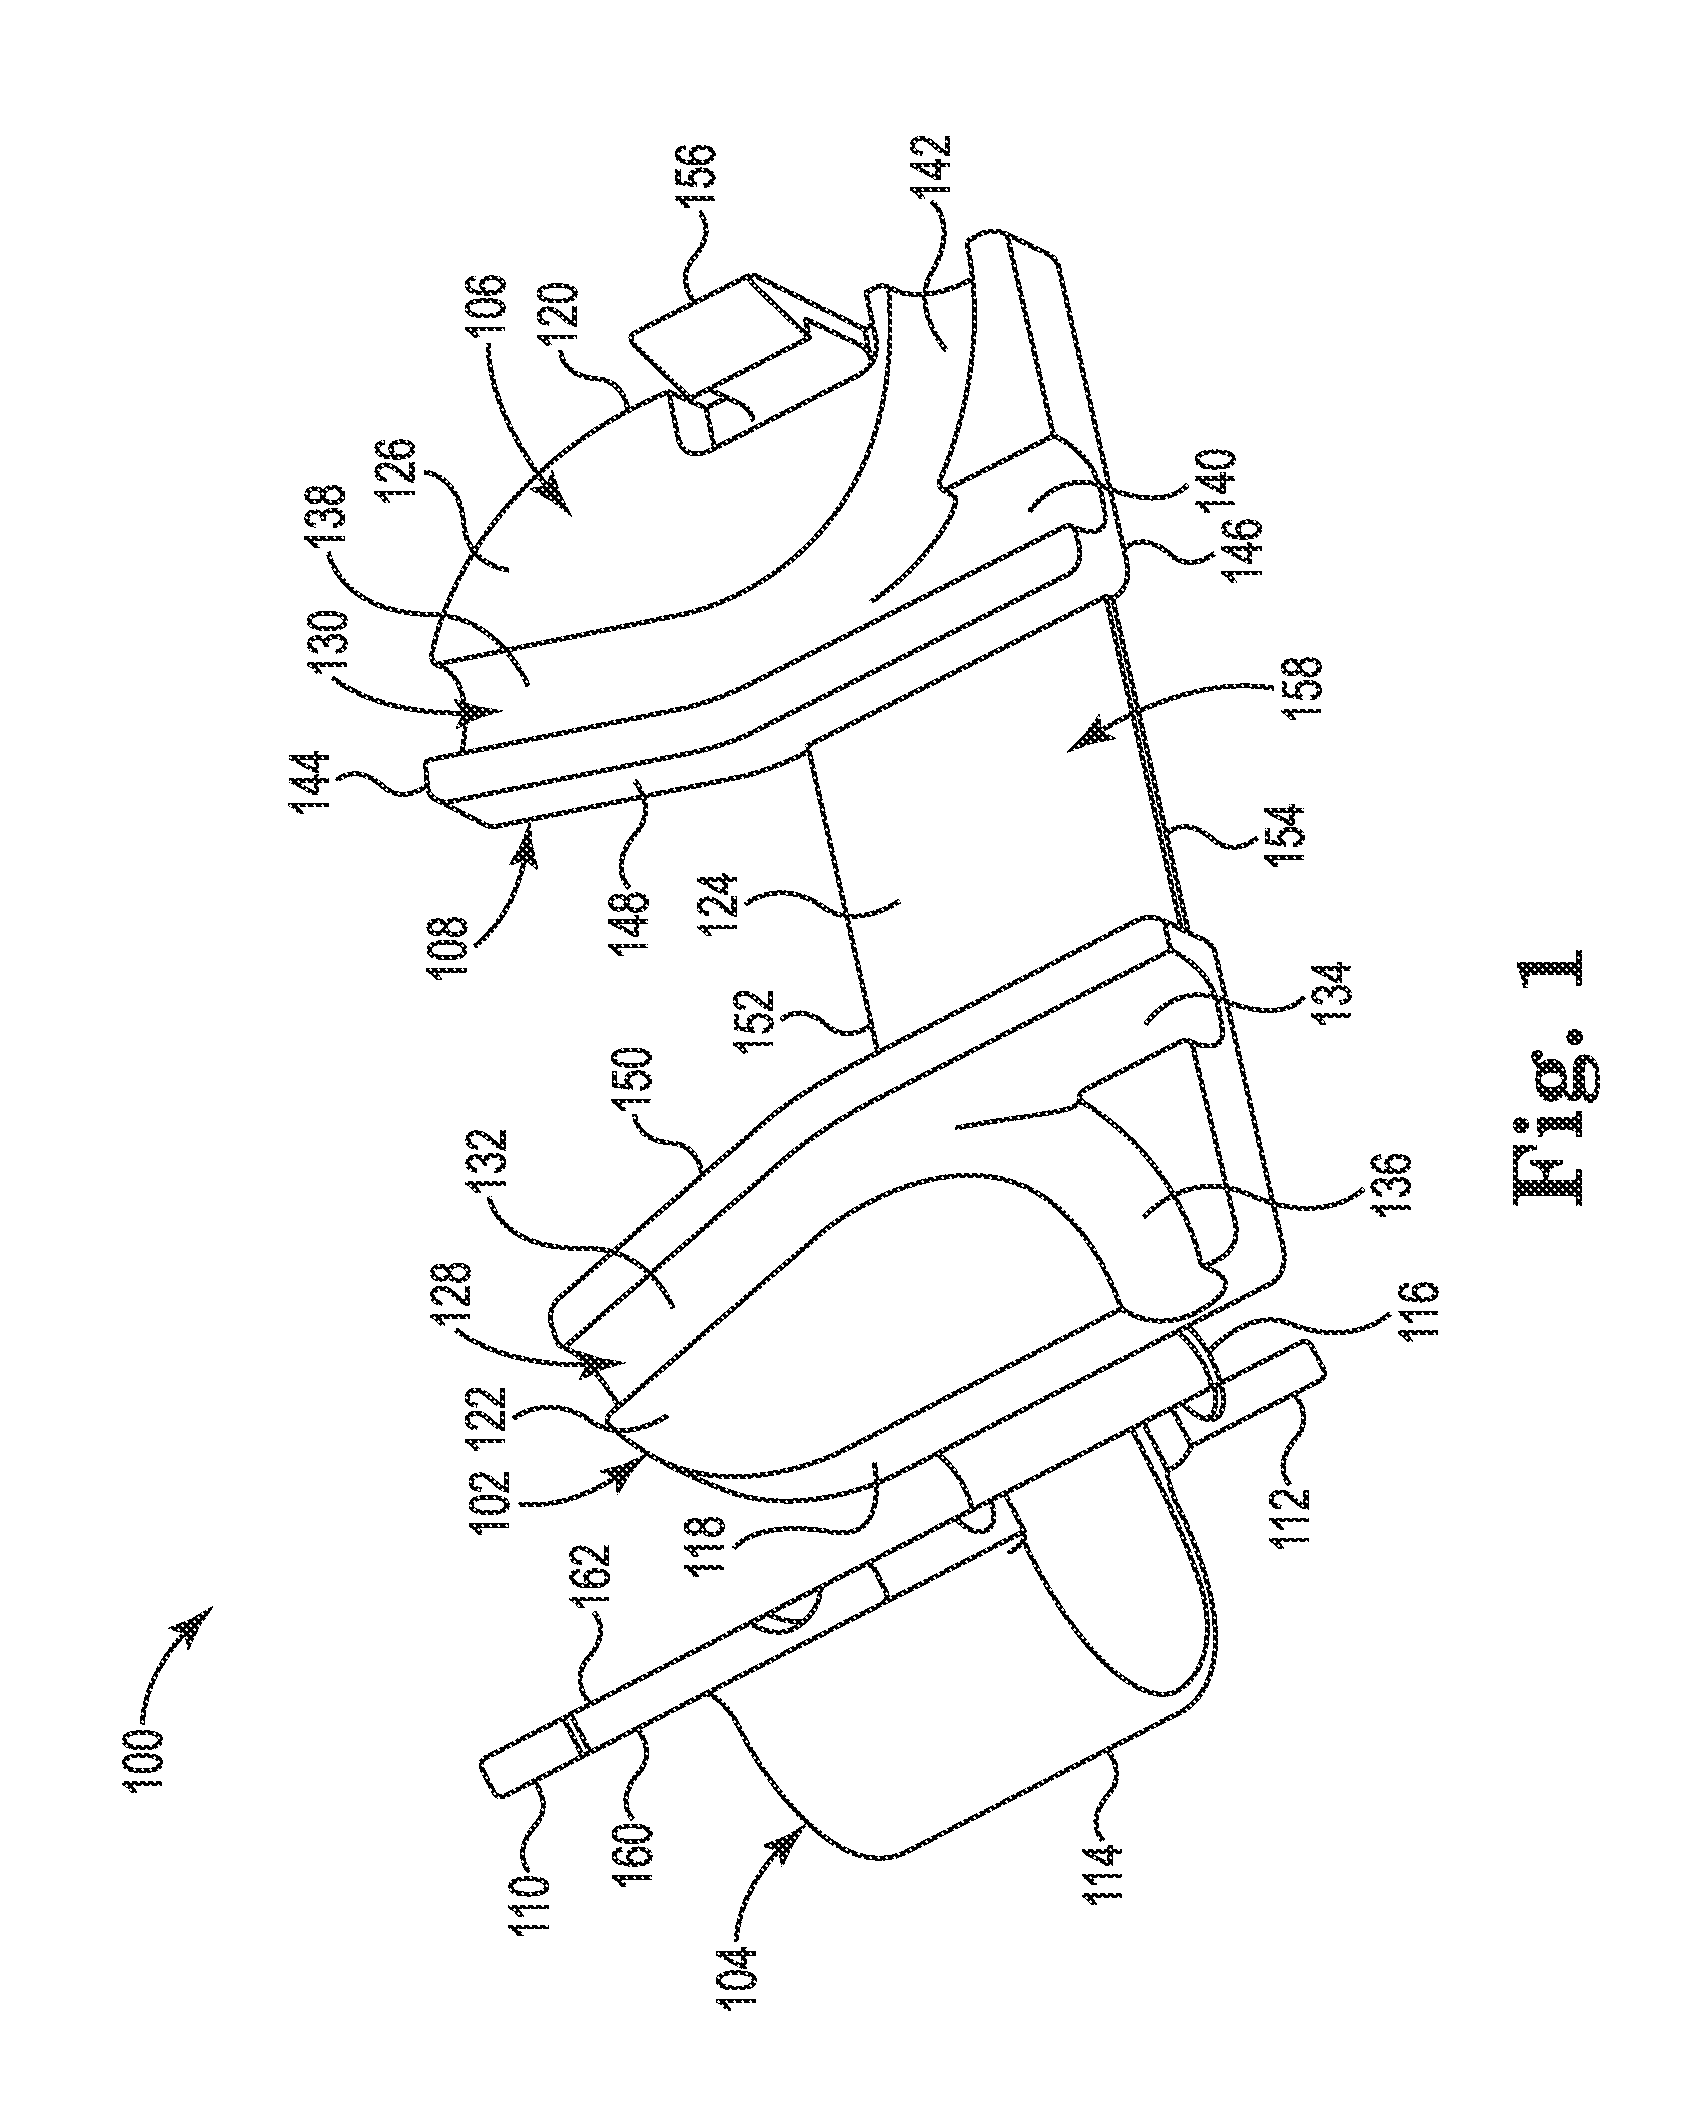 Infusion site retainer for maintaining infusion tubing